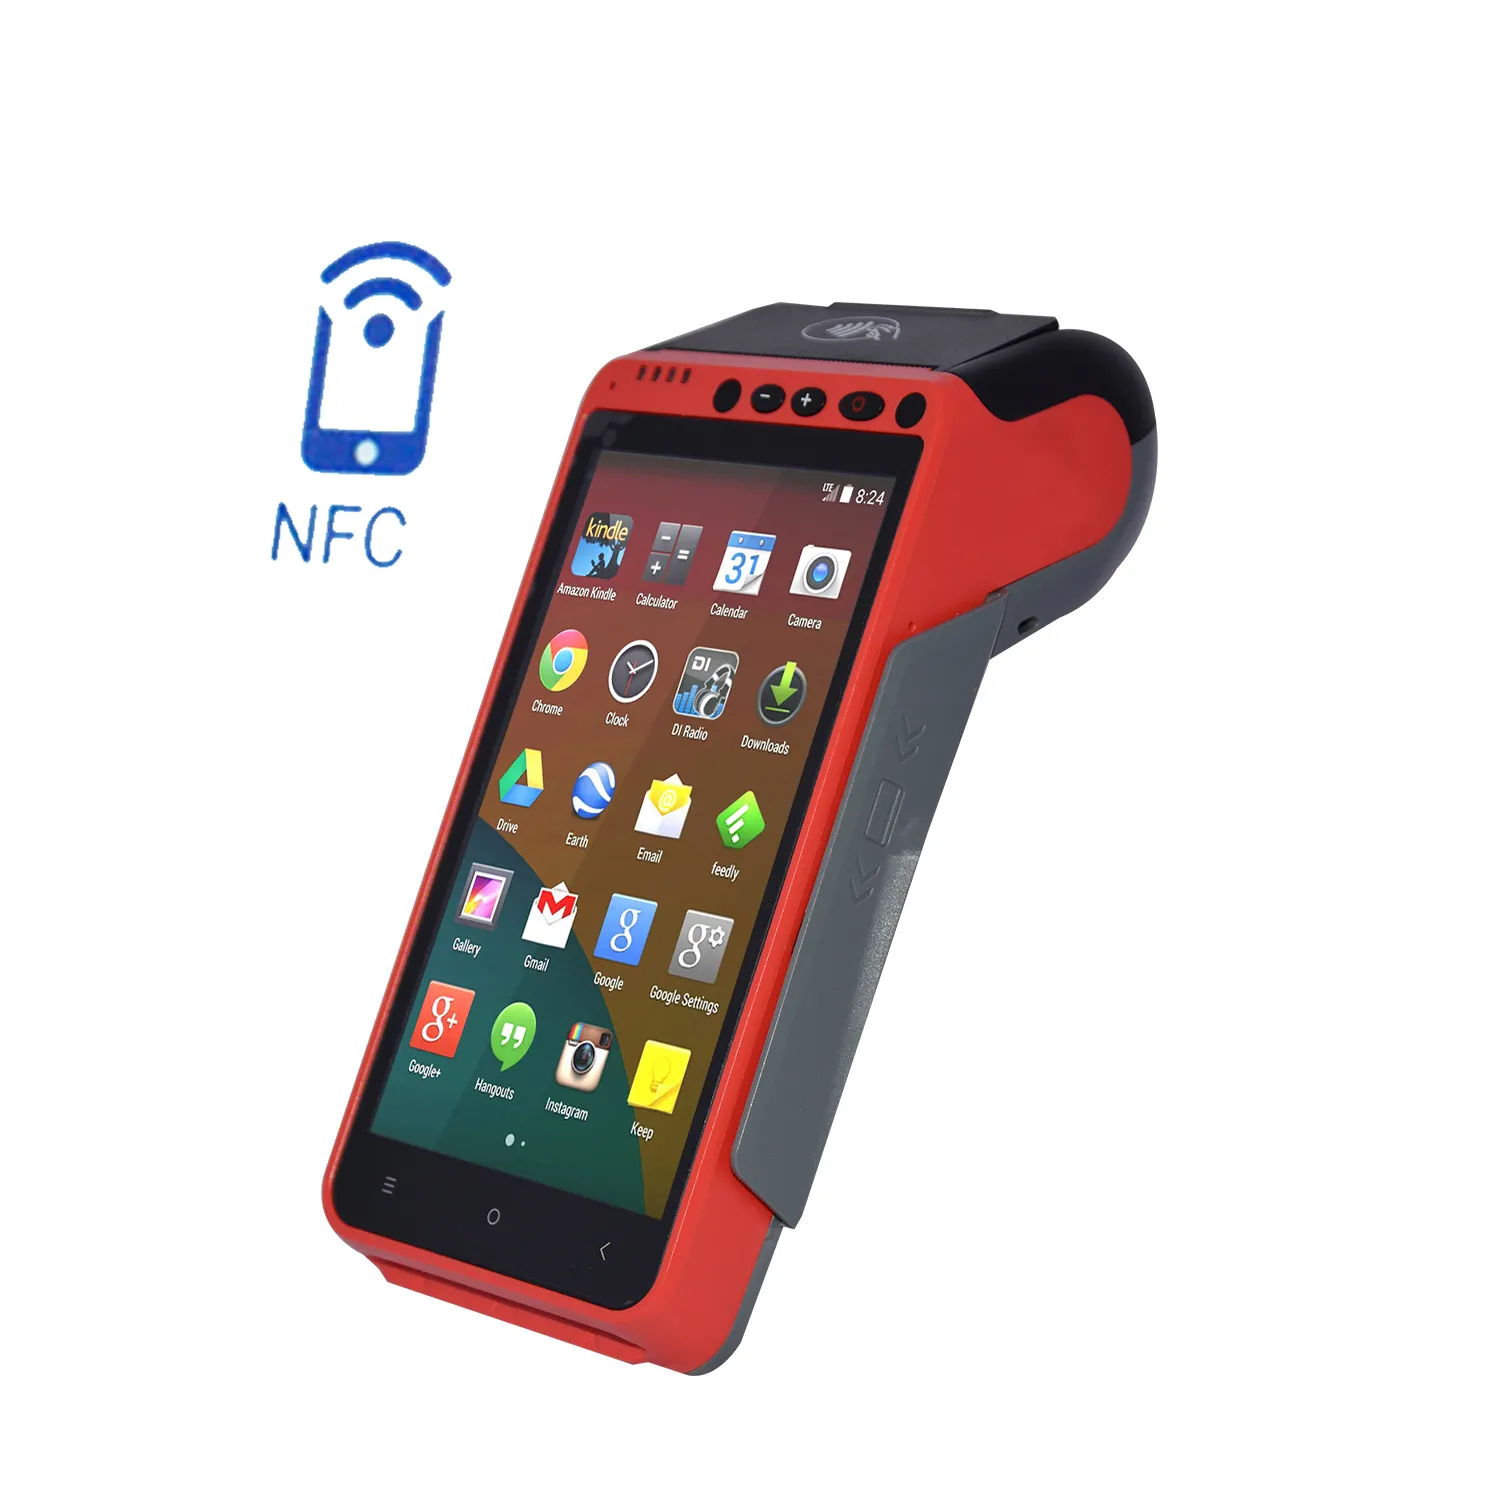 Smart Wireless 4G/WIFI/BT GPRS NFC Handheld Touch Screen Android POS Terminal With Camera Fingerprint HCC-Z100